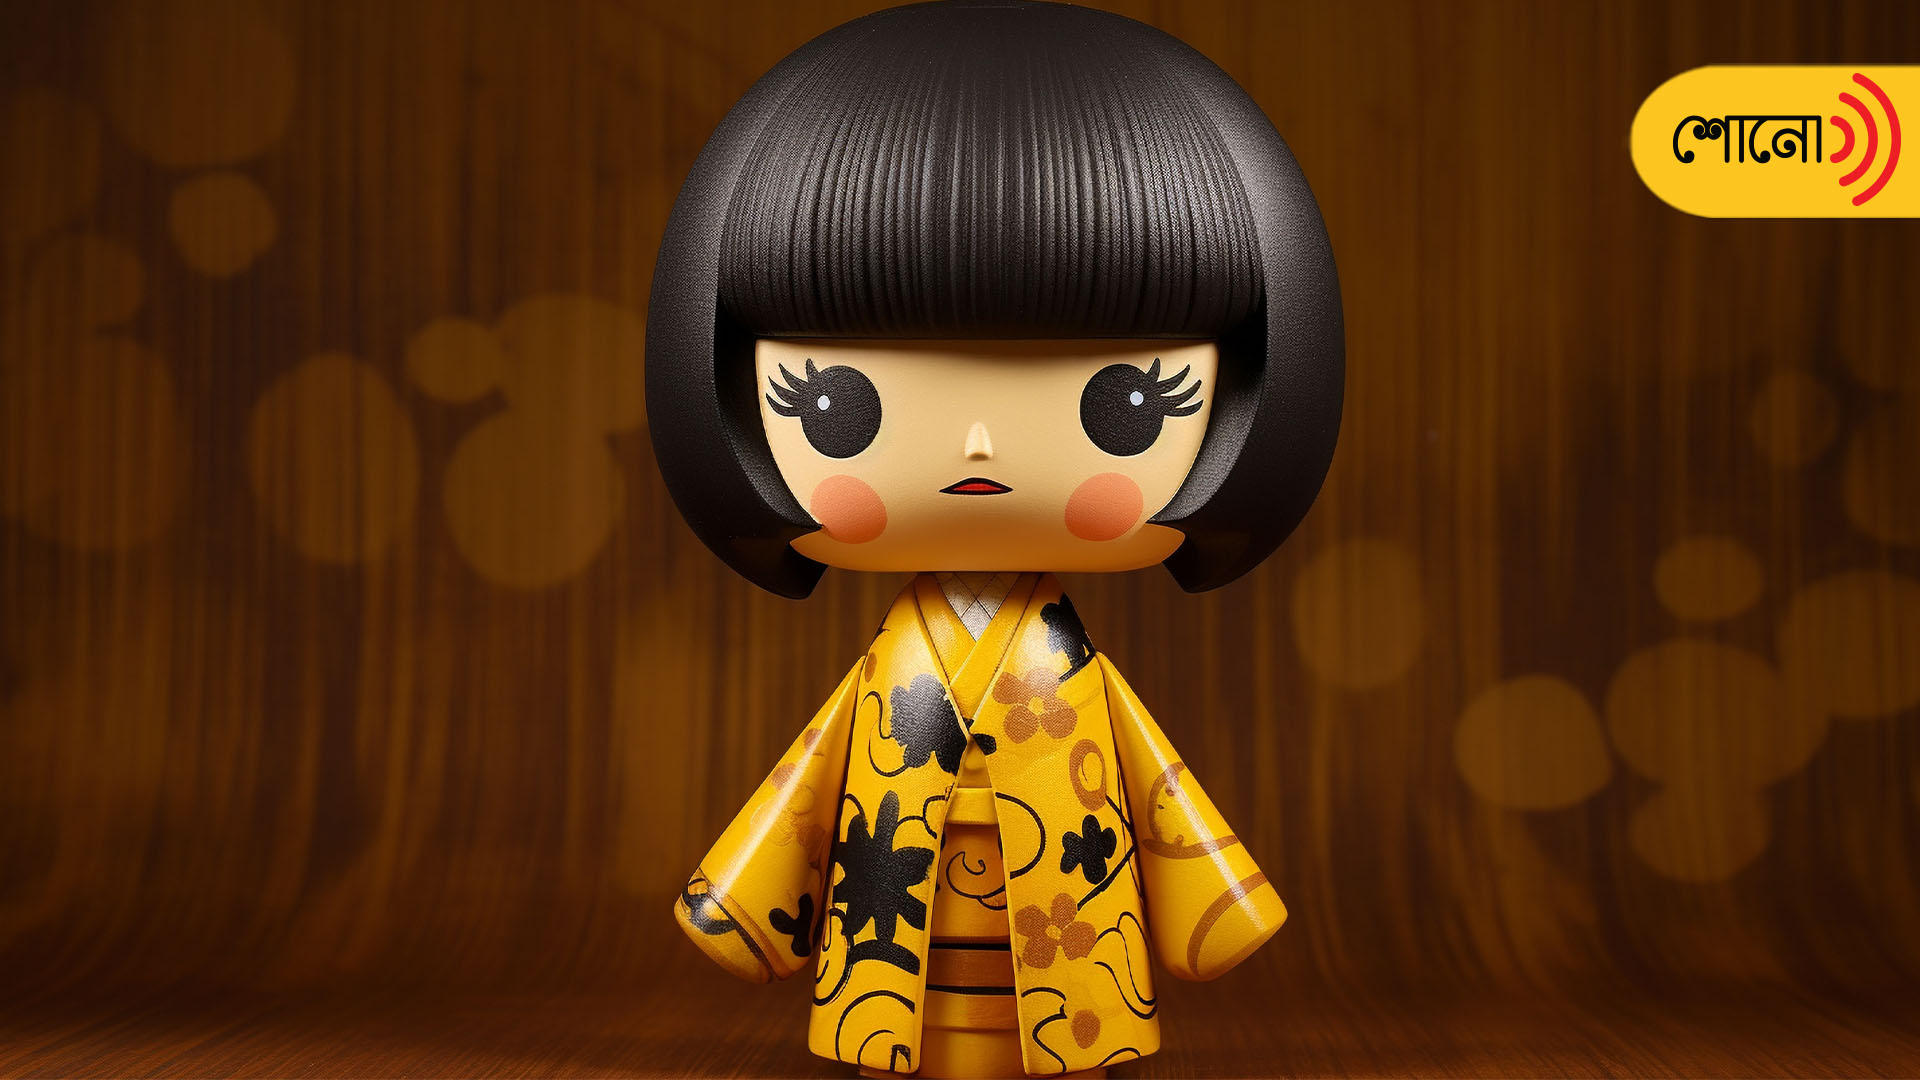 know more about the doll Okiku and the mysterious story related to it